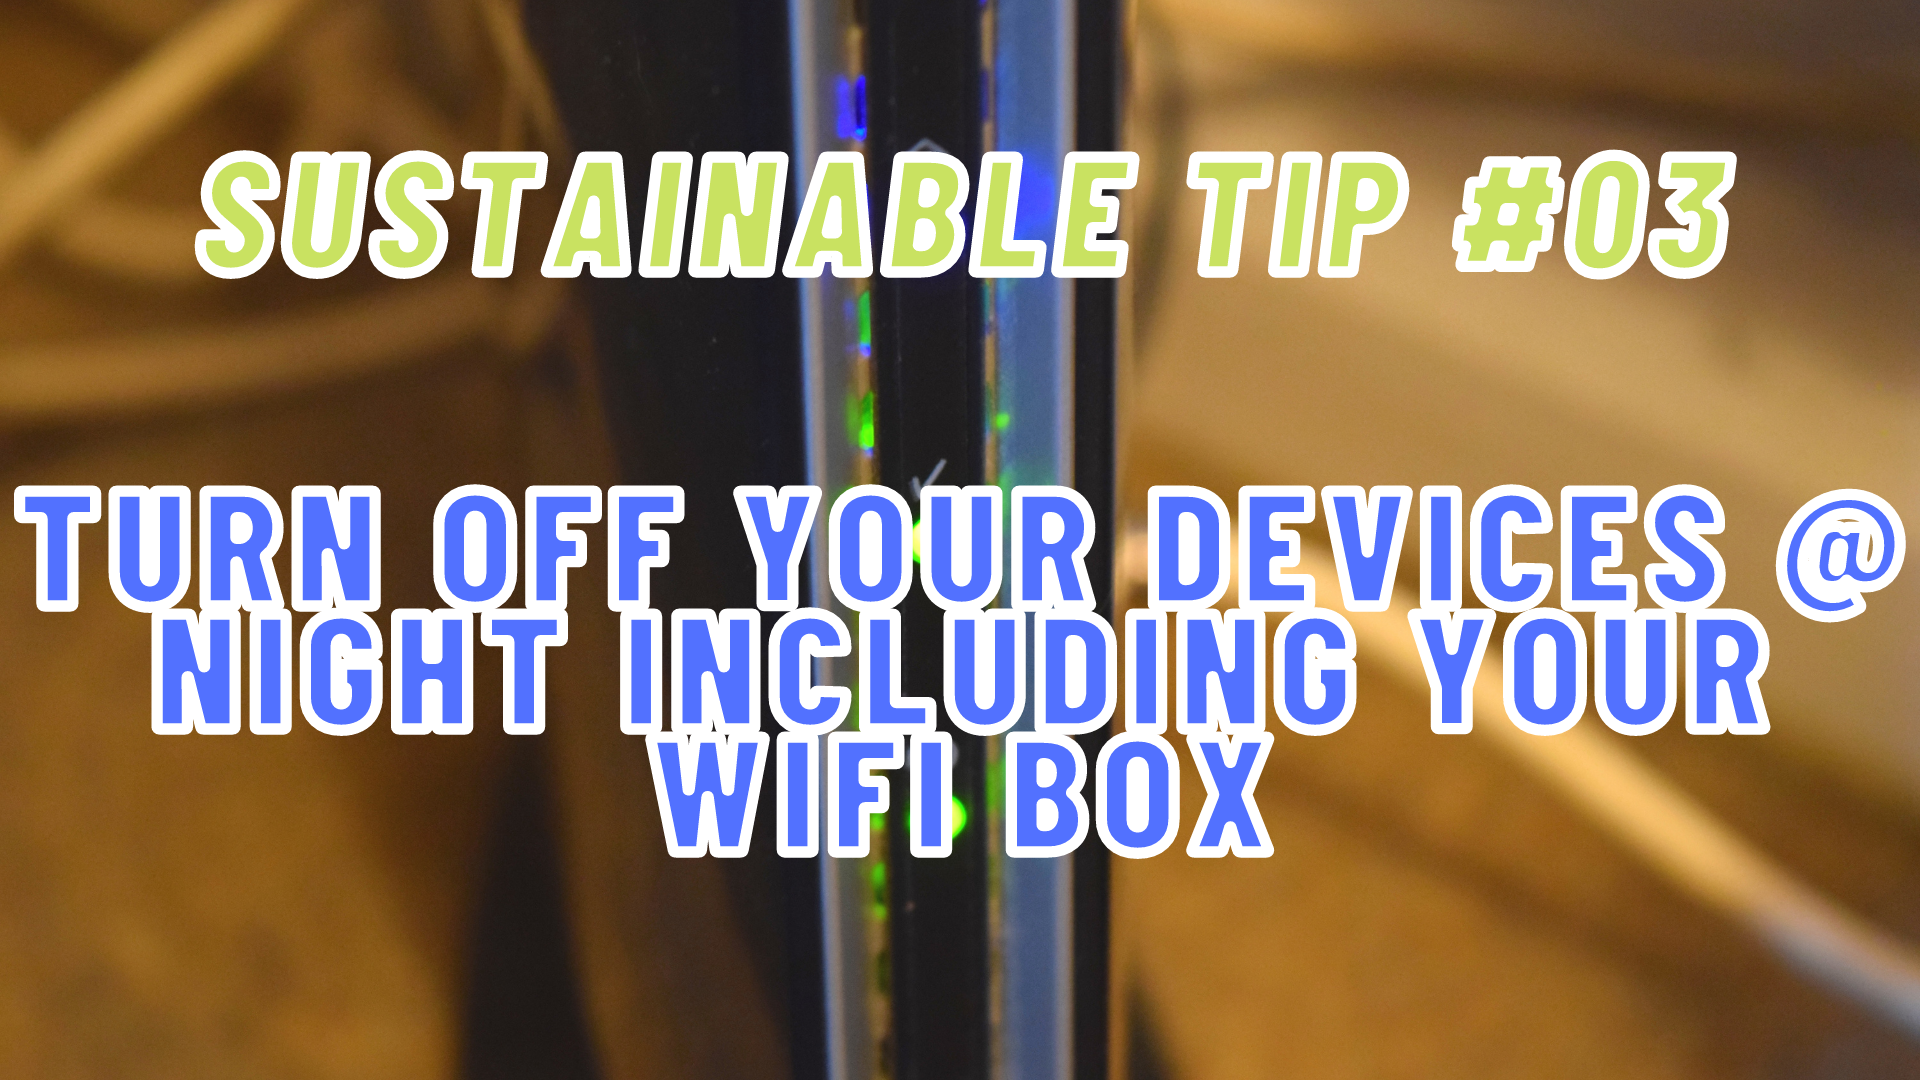 Sustainable Tip #03